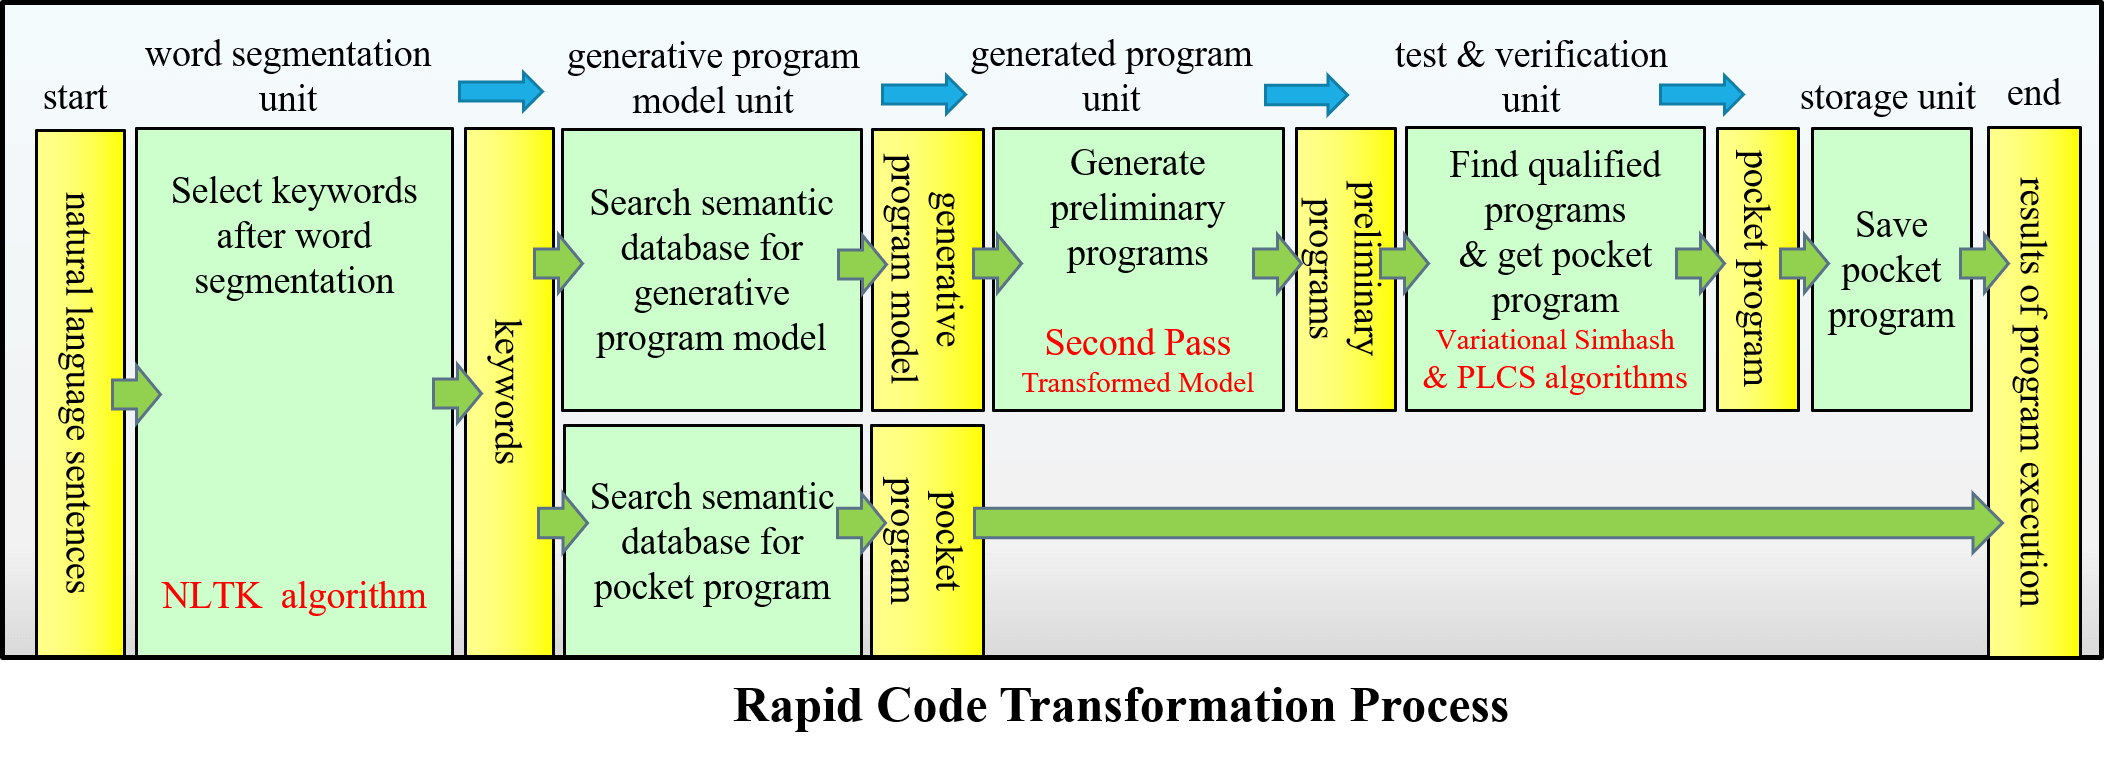 Implementation of Rapid Code Transformation Process Using Deep Learning Approaches